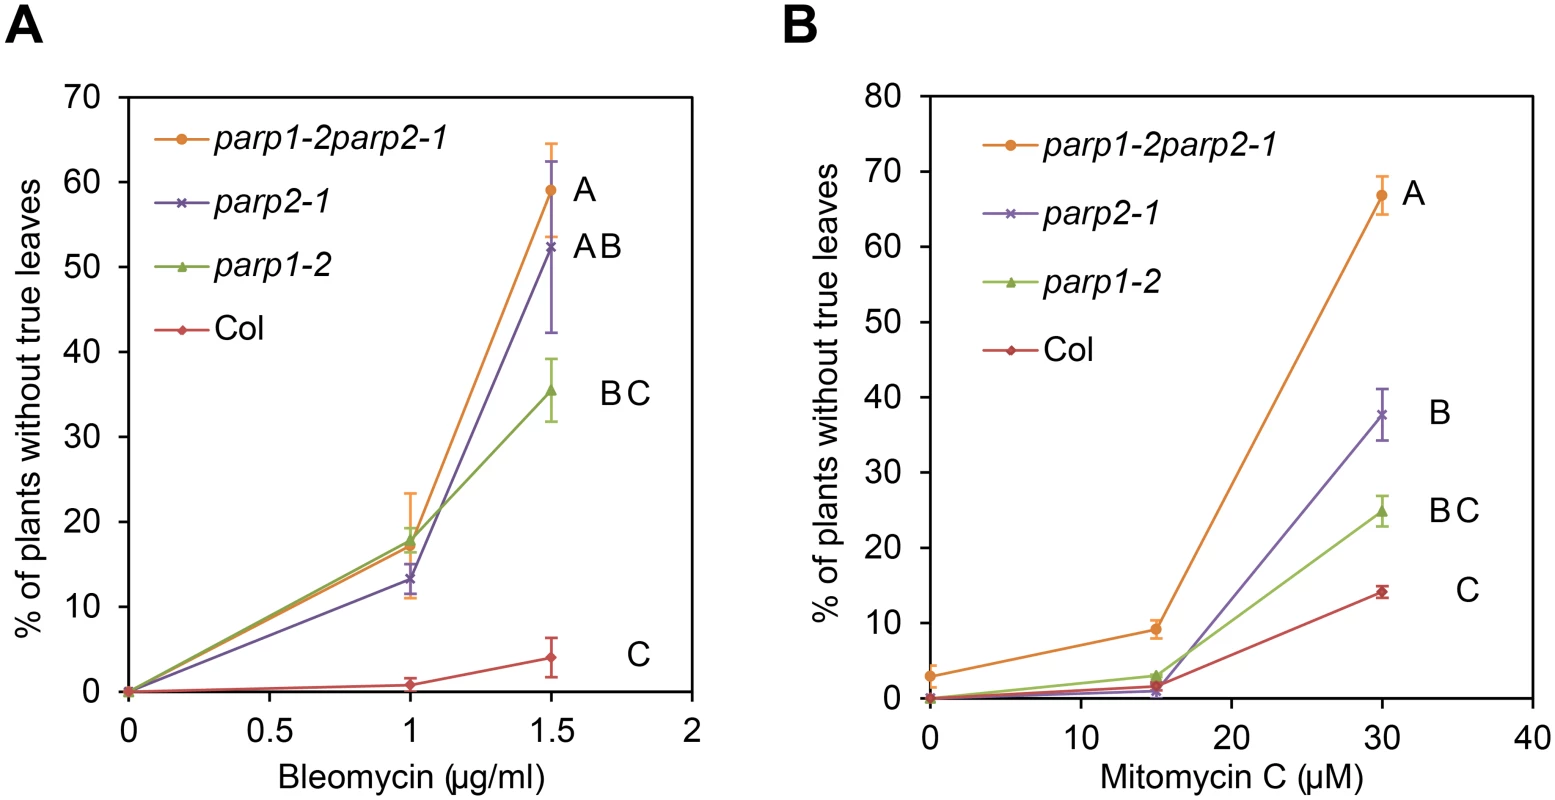 Arabidopsis <i>parp</i> mutants are hypersensitive to DNA damage agents.